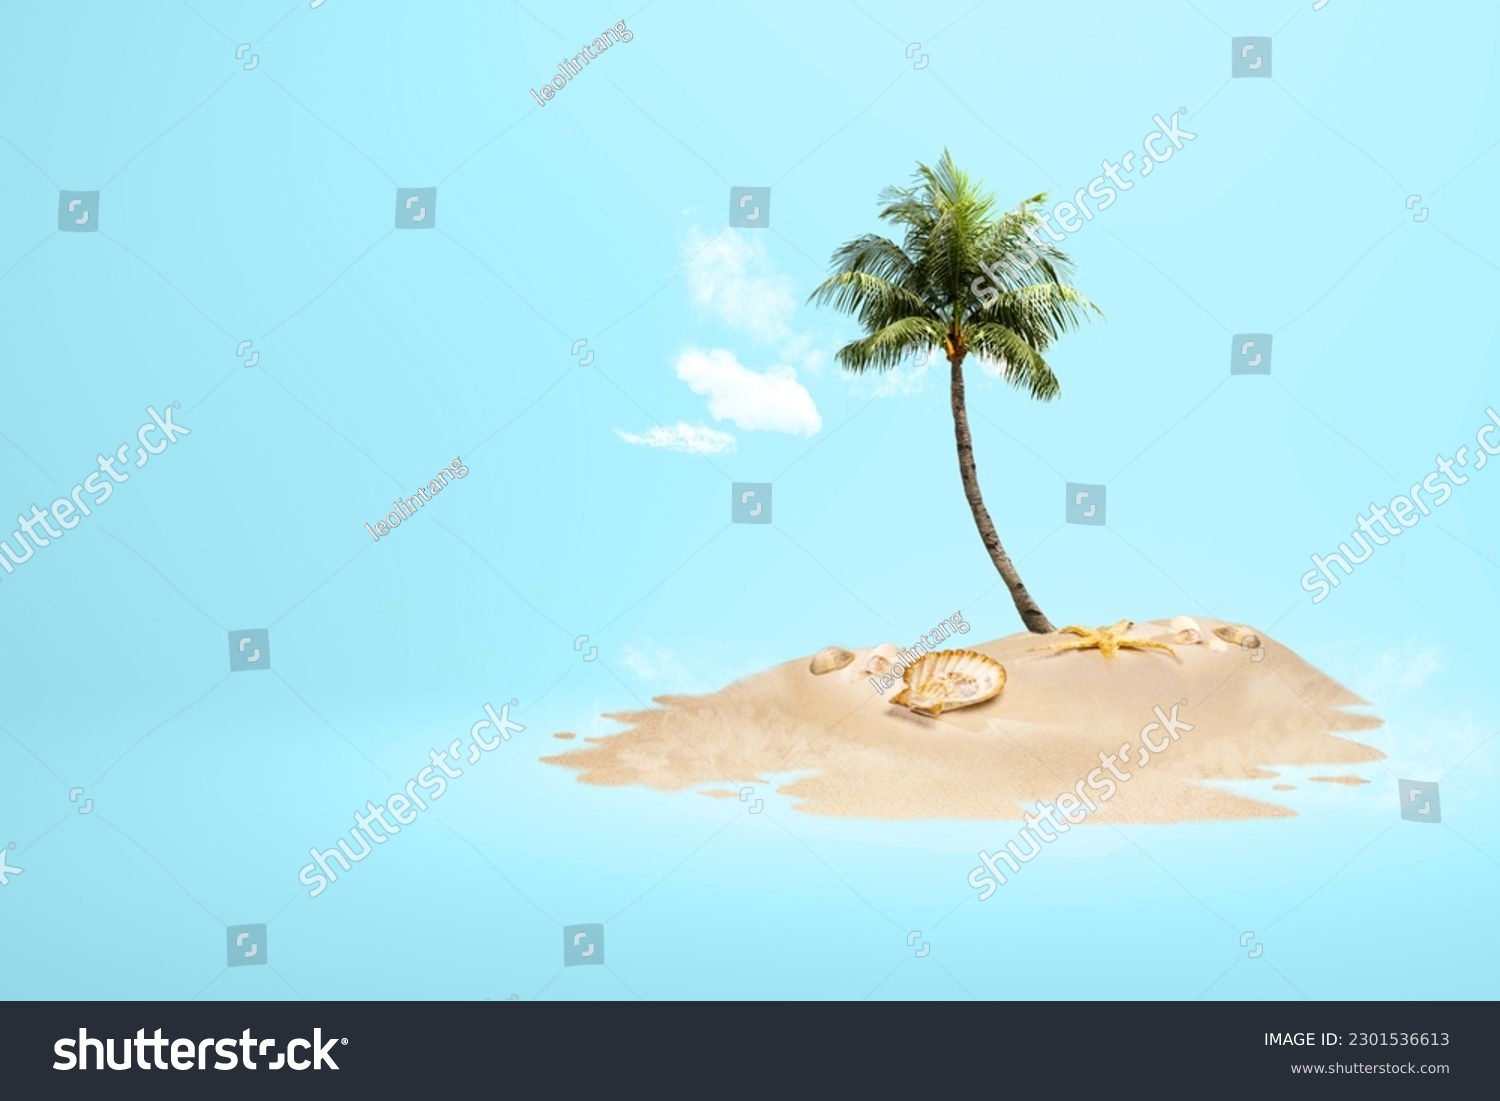 View of sandy beach with shells and palm tree with colored background #2301536613